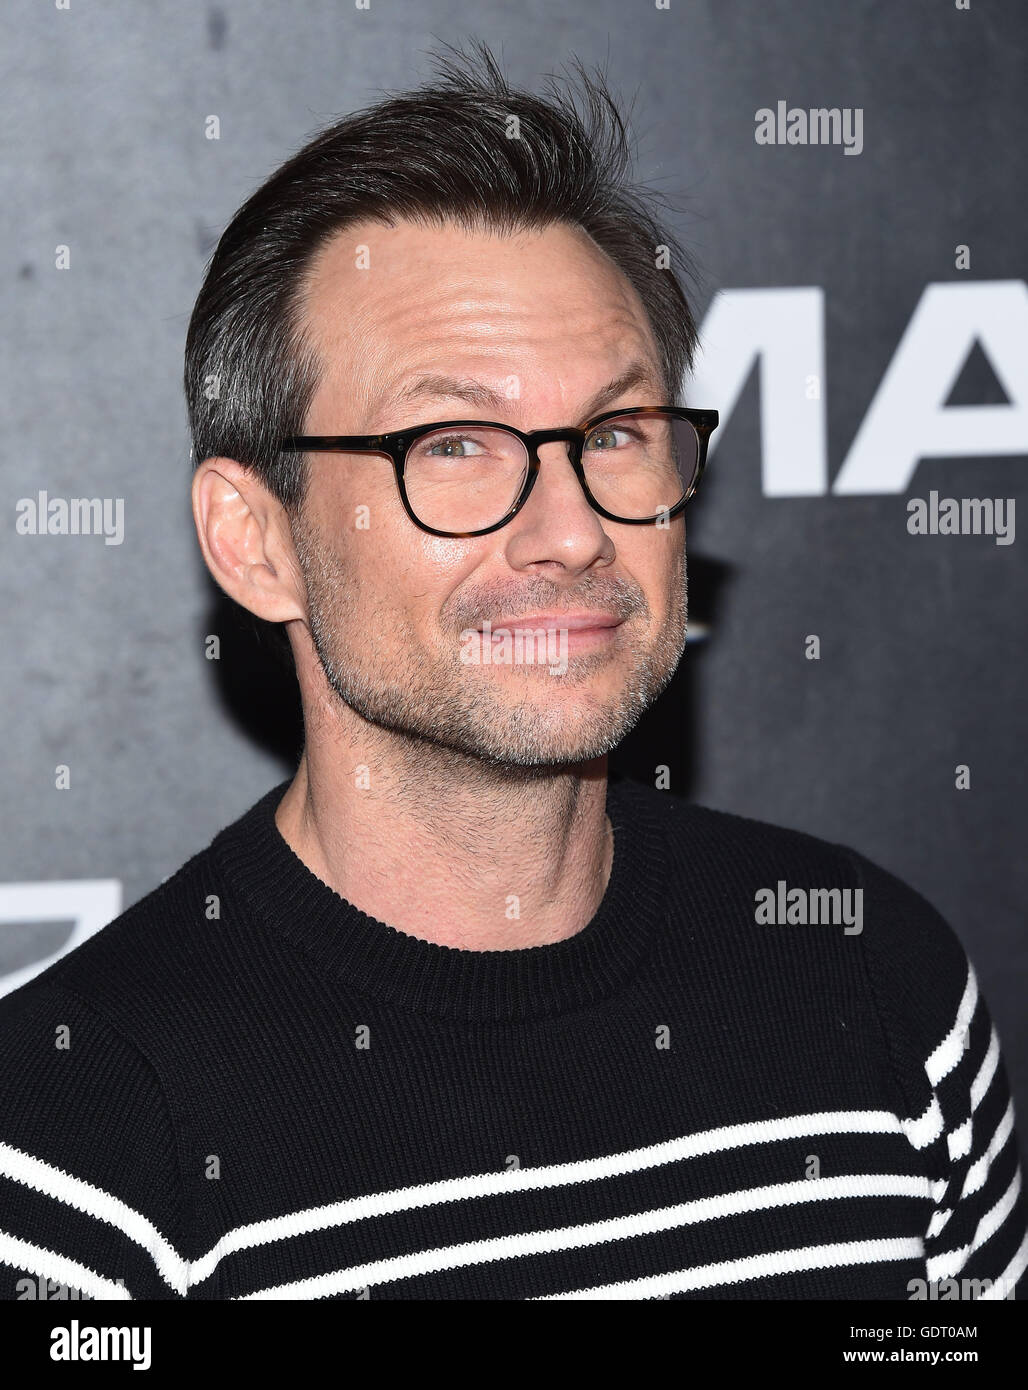 San Diego, California, USA. 20th July, 2016. Christian Slater arrives for the premiere of the film 'Star Trek Beyond' at the Embarcadero Marina Park. Credit:  Lisa O'Connor/ZUMA Wire/Alamy Live News Stock Photo